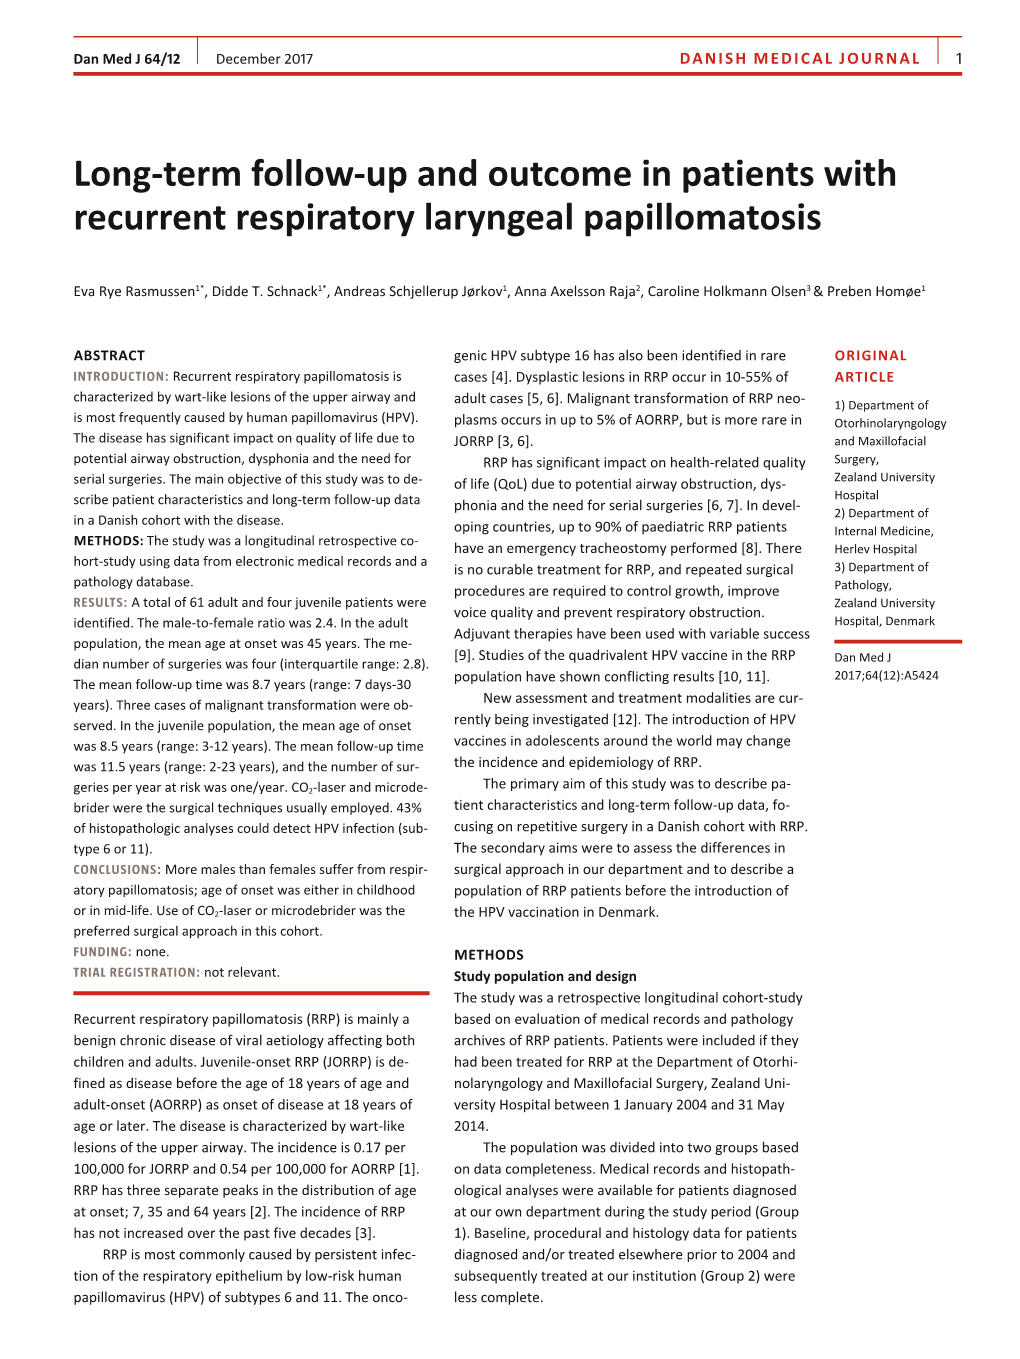 Long-Term Follow-Up and Outcome in Patients with Recurrent Respiratory Laryngeal Papillomatosis